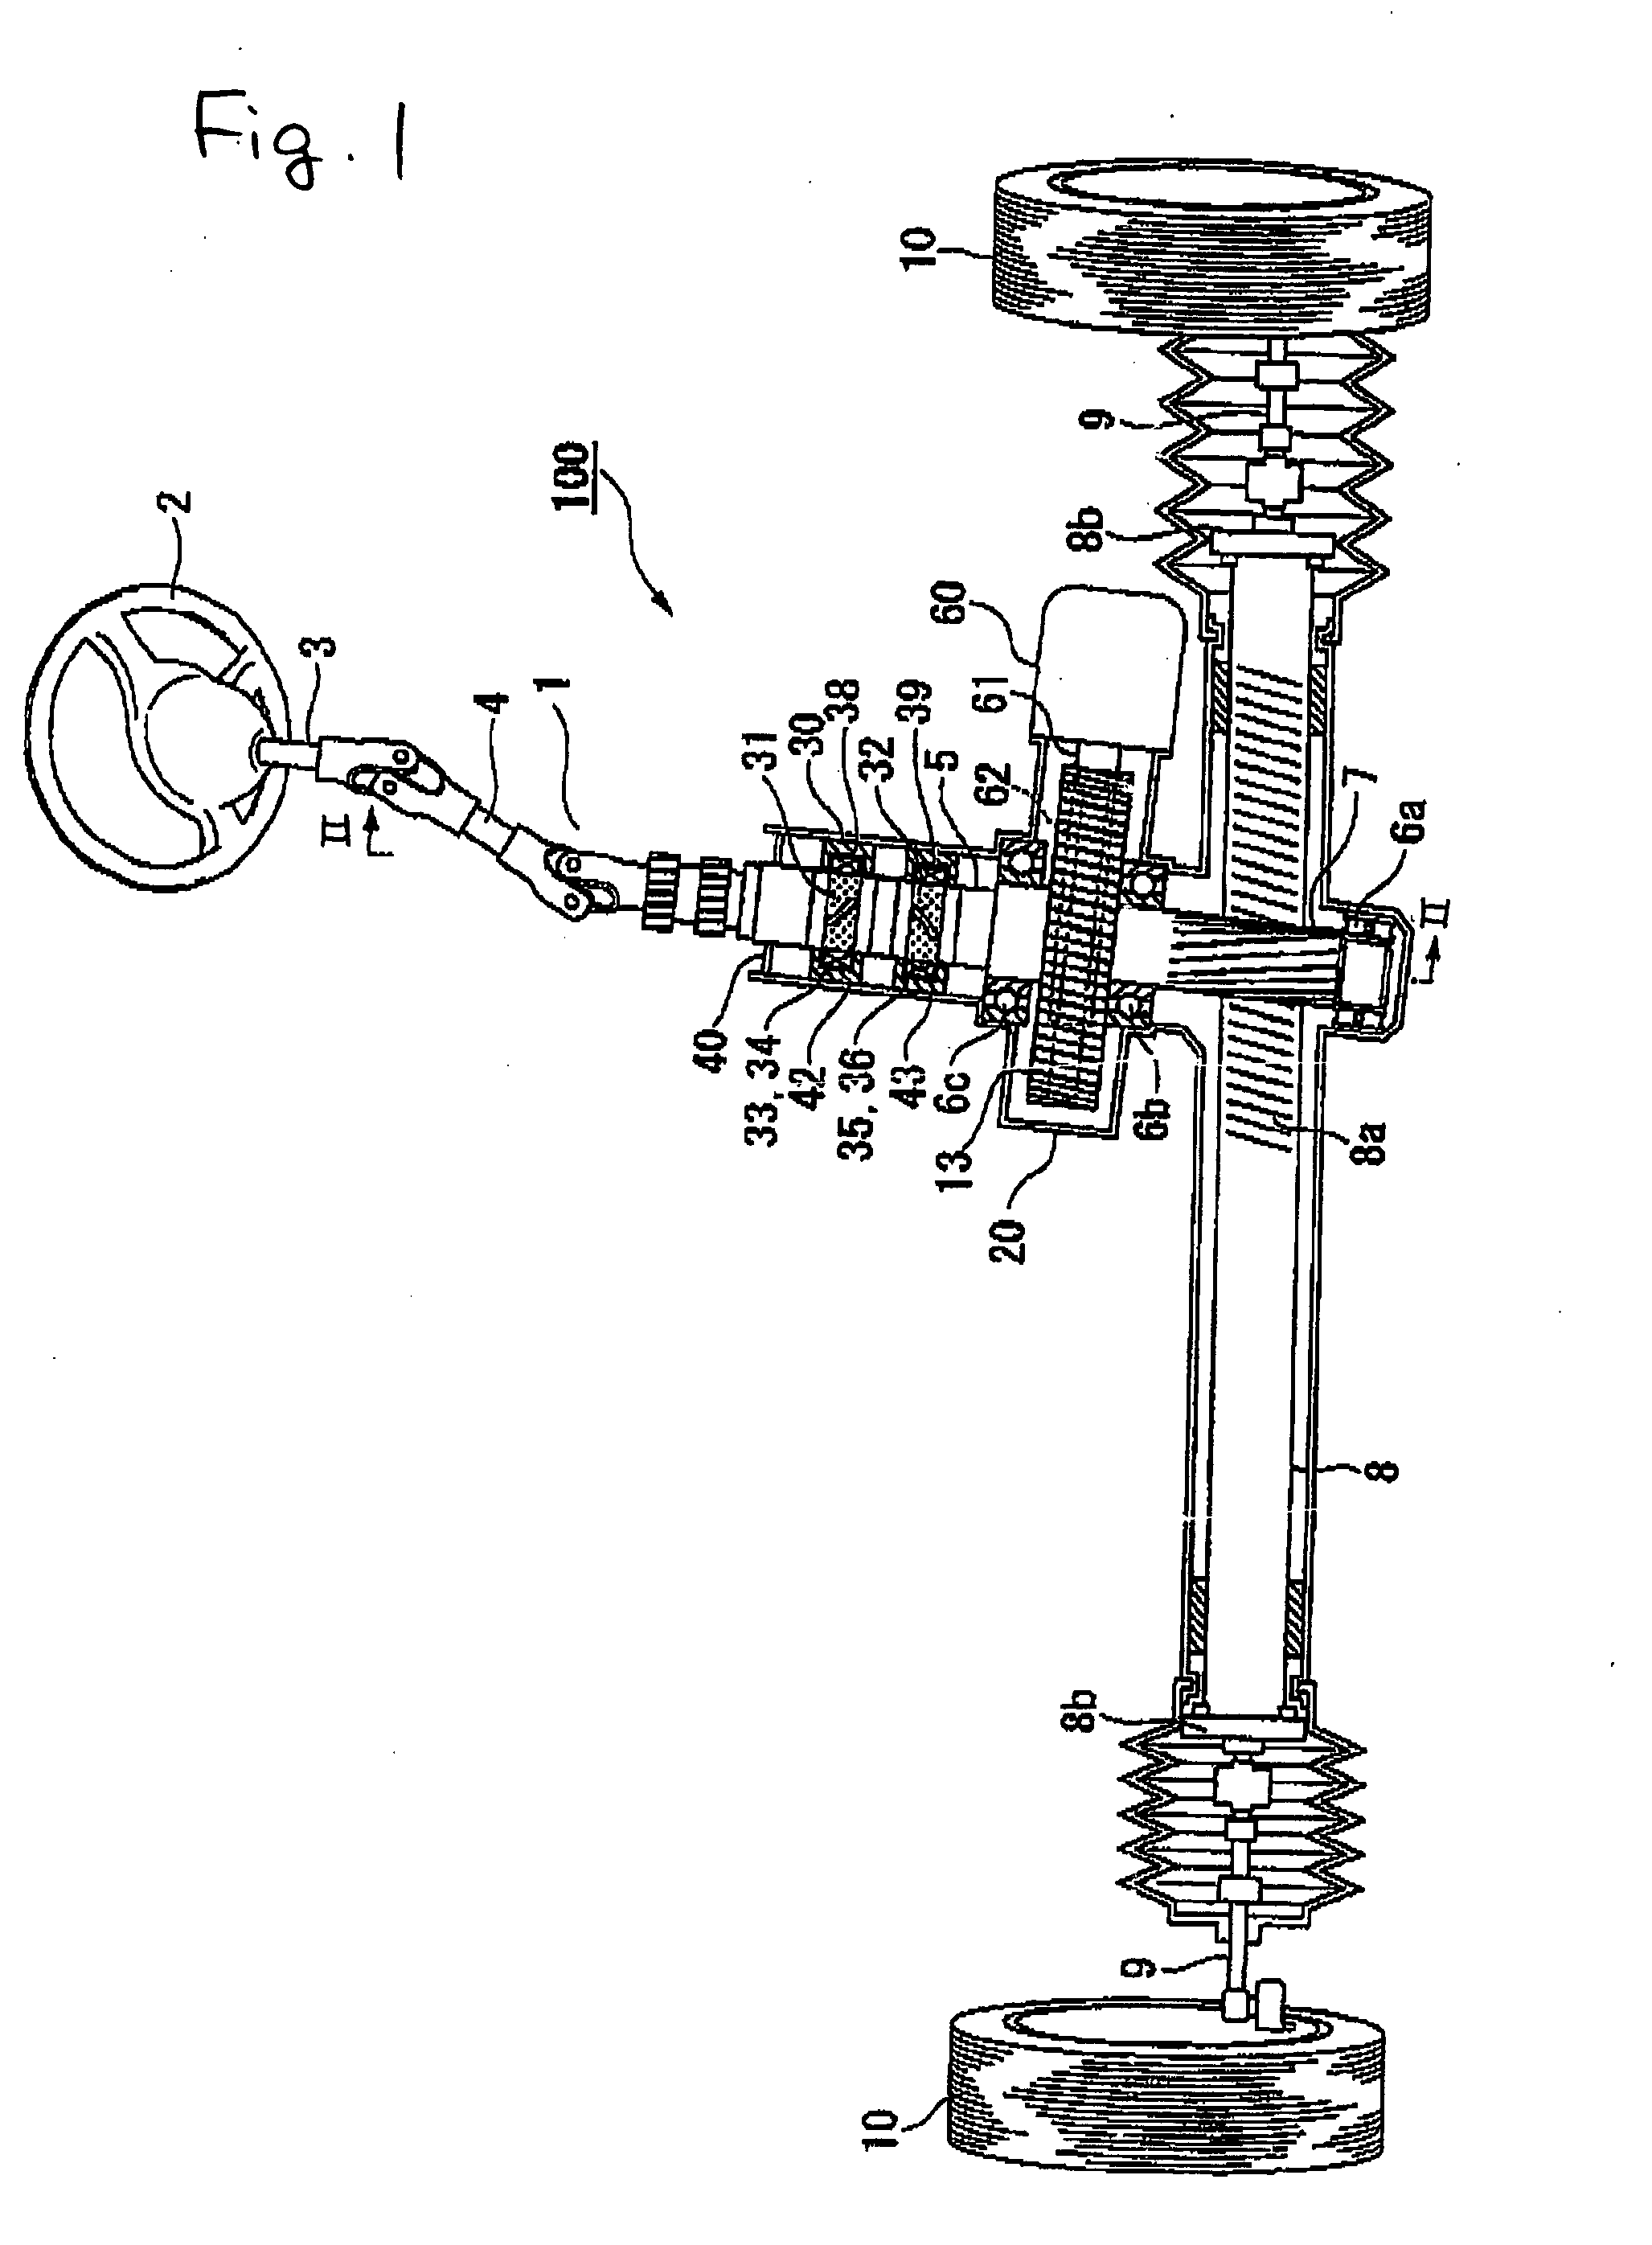 Magnetostrictive torque sensor and electric power steering apparatus